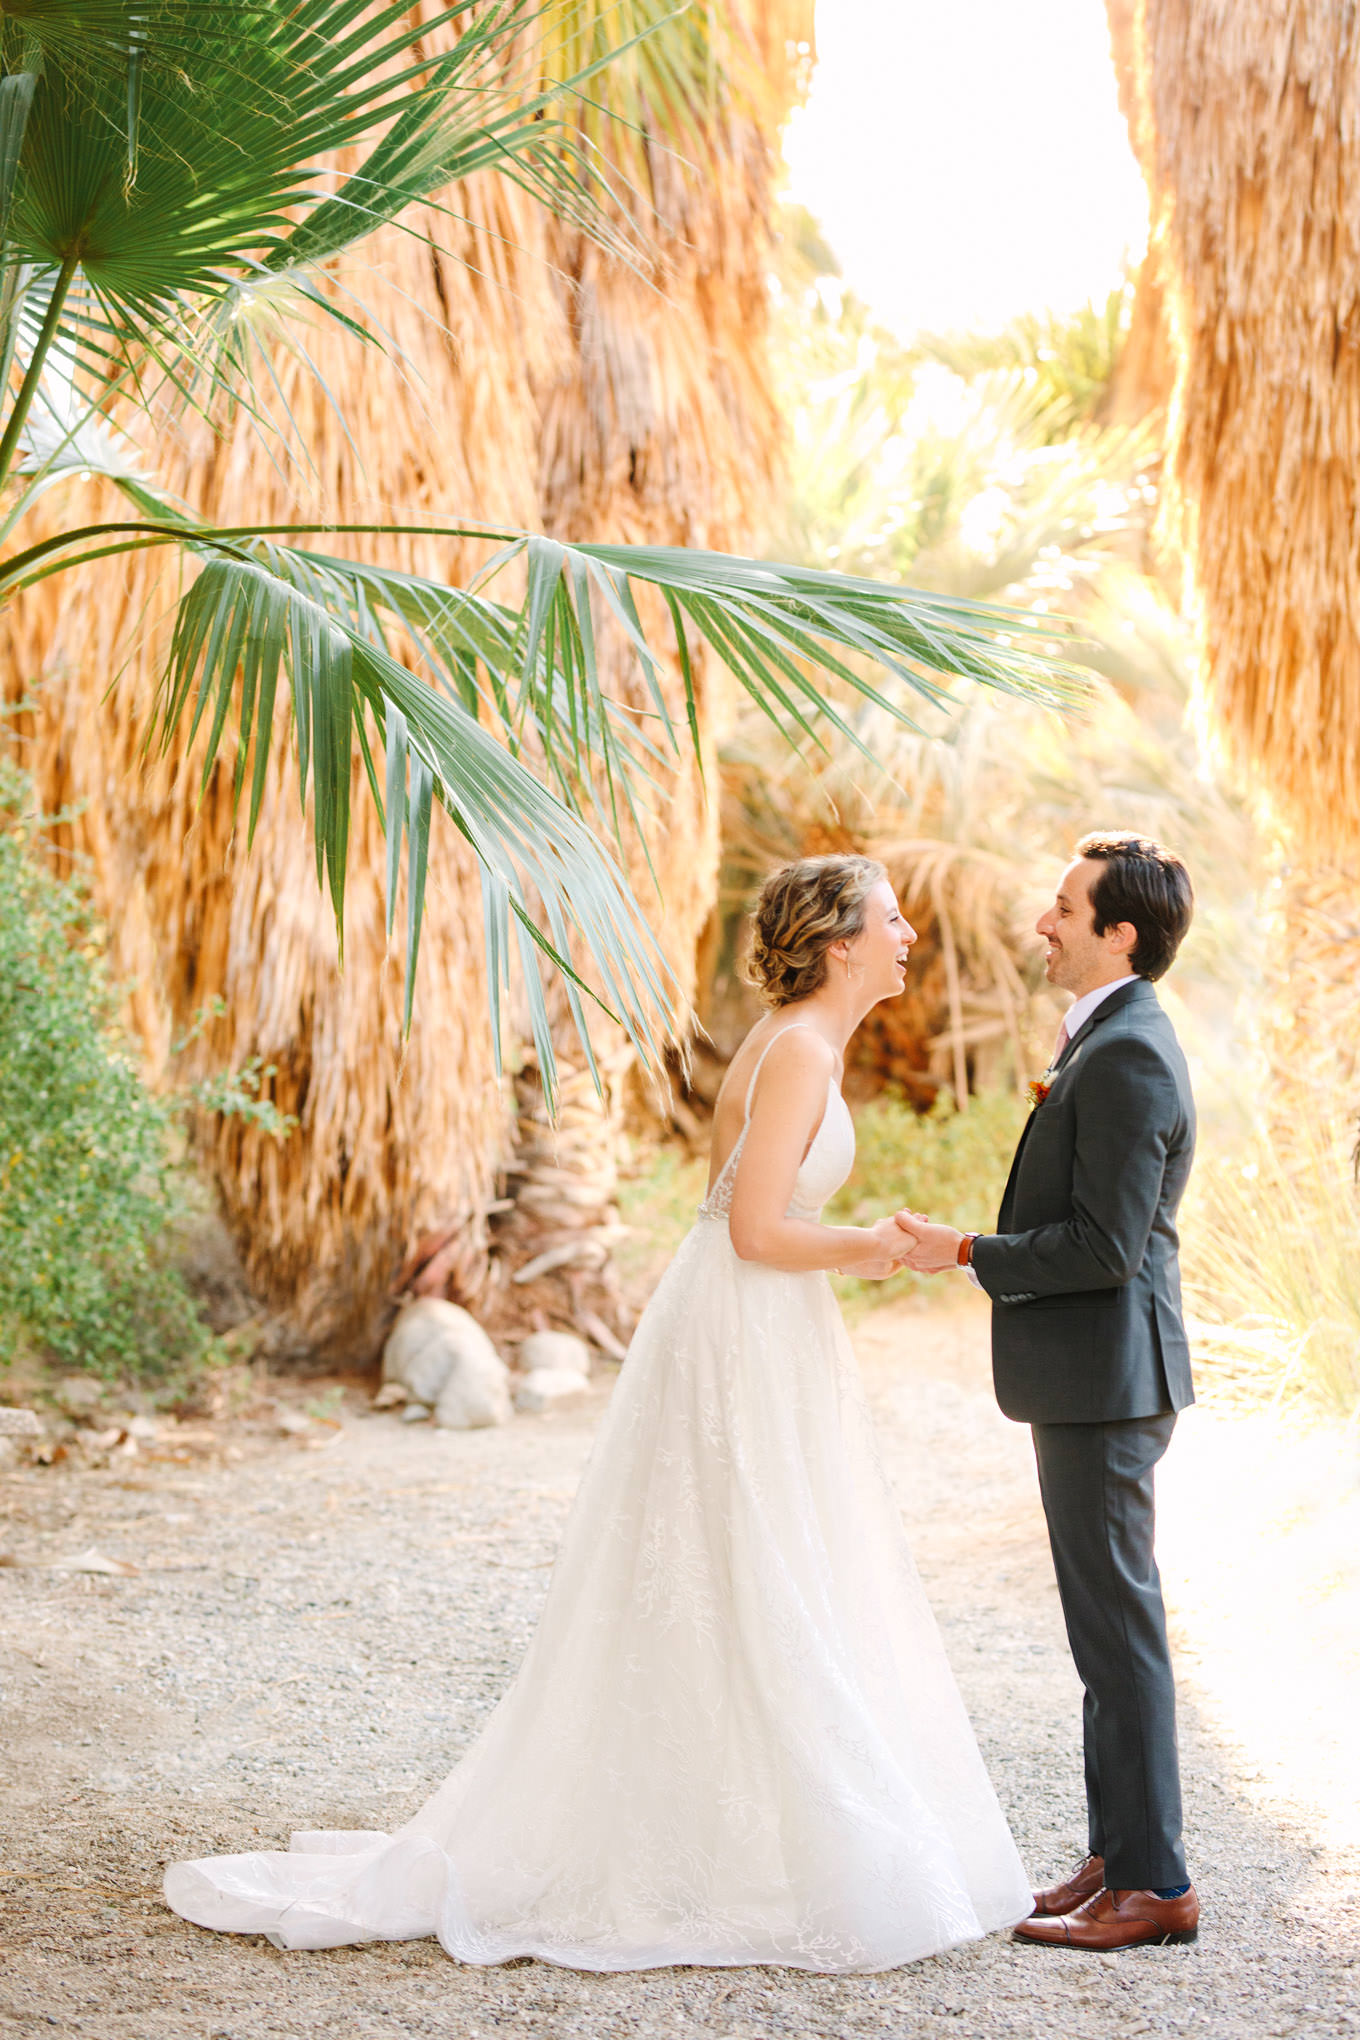 Bride and groom first look in palm garden | Living Desert Zoo & Gardens wedding with unique details | Elevated and colorful wedding photography for fun-loving couples in Southern California |  #PalmSprings #palmspringsphotographer #gardenwedding #palmspringswedding  Source: Mary Costa Photography | Los Angeles wedding photographer 